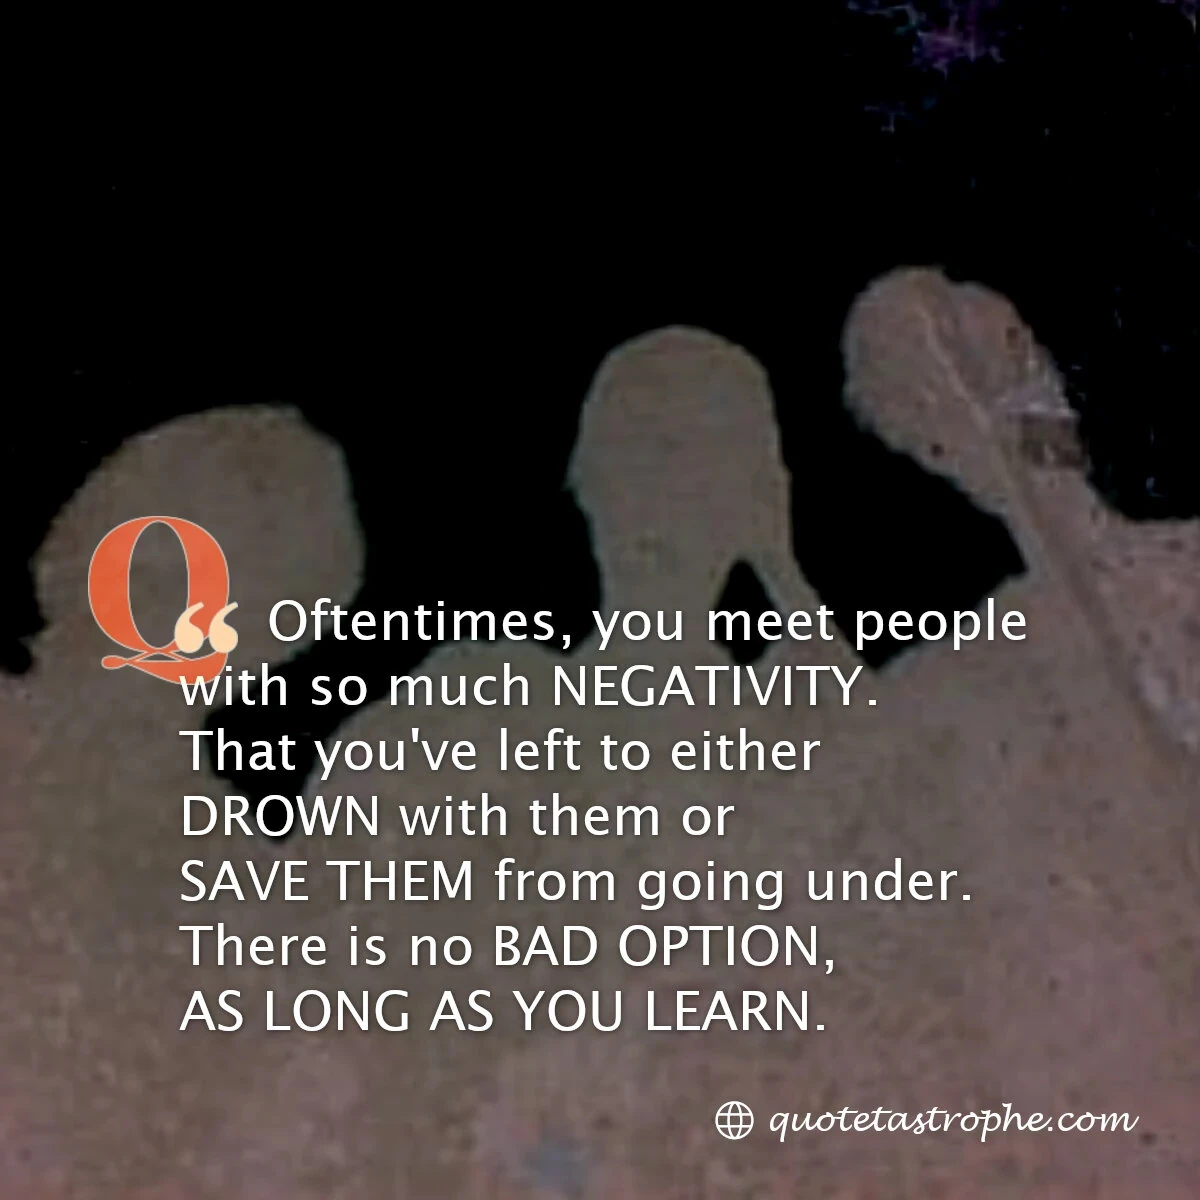 Oftentimes, You Meet People with so Much Negativity